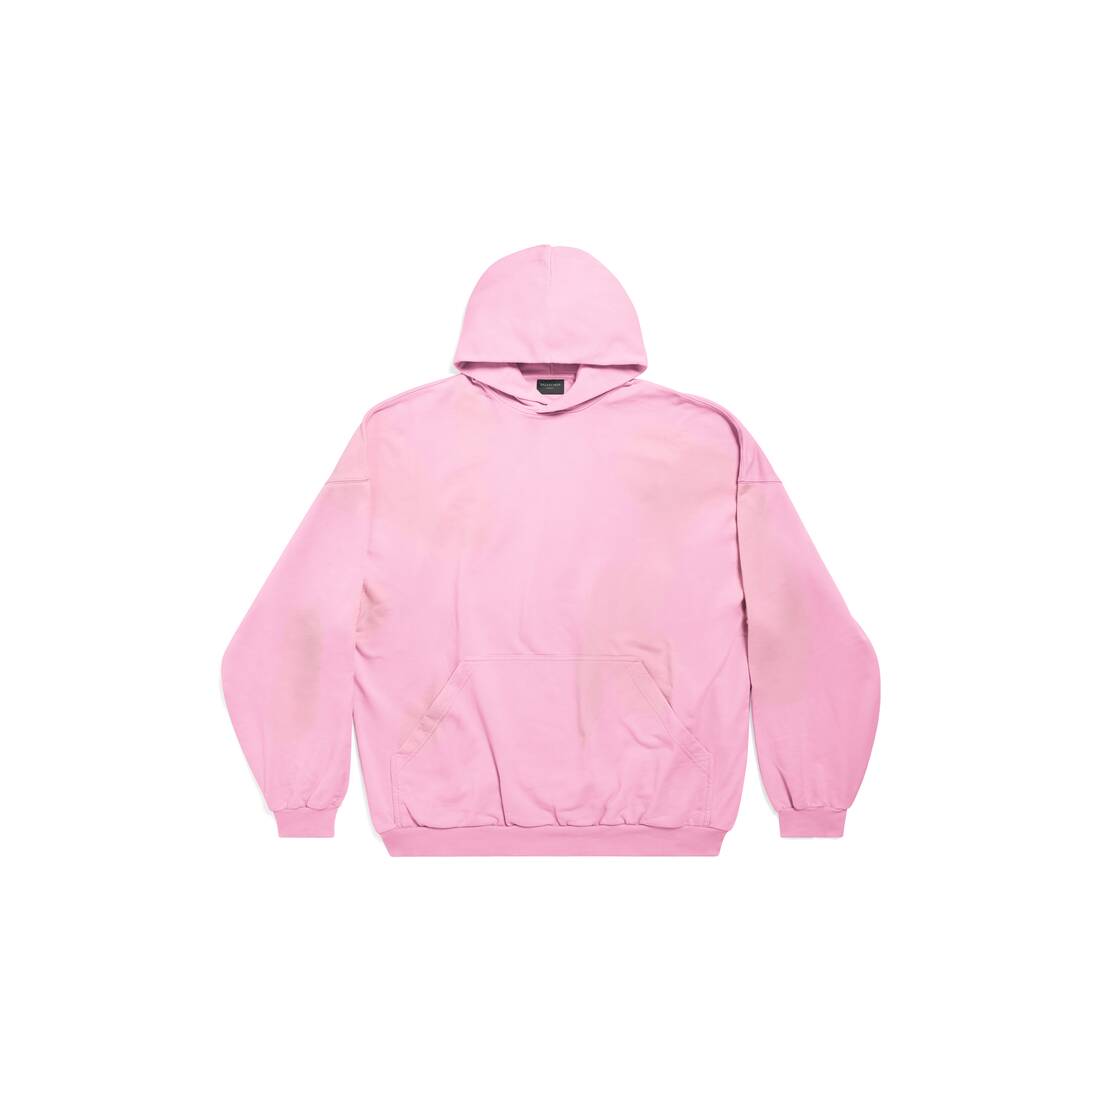 BCG Black Pullover Hoodie with Pink Stitching, Women's Extra Large